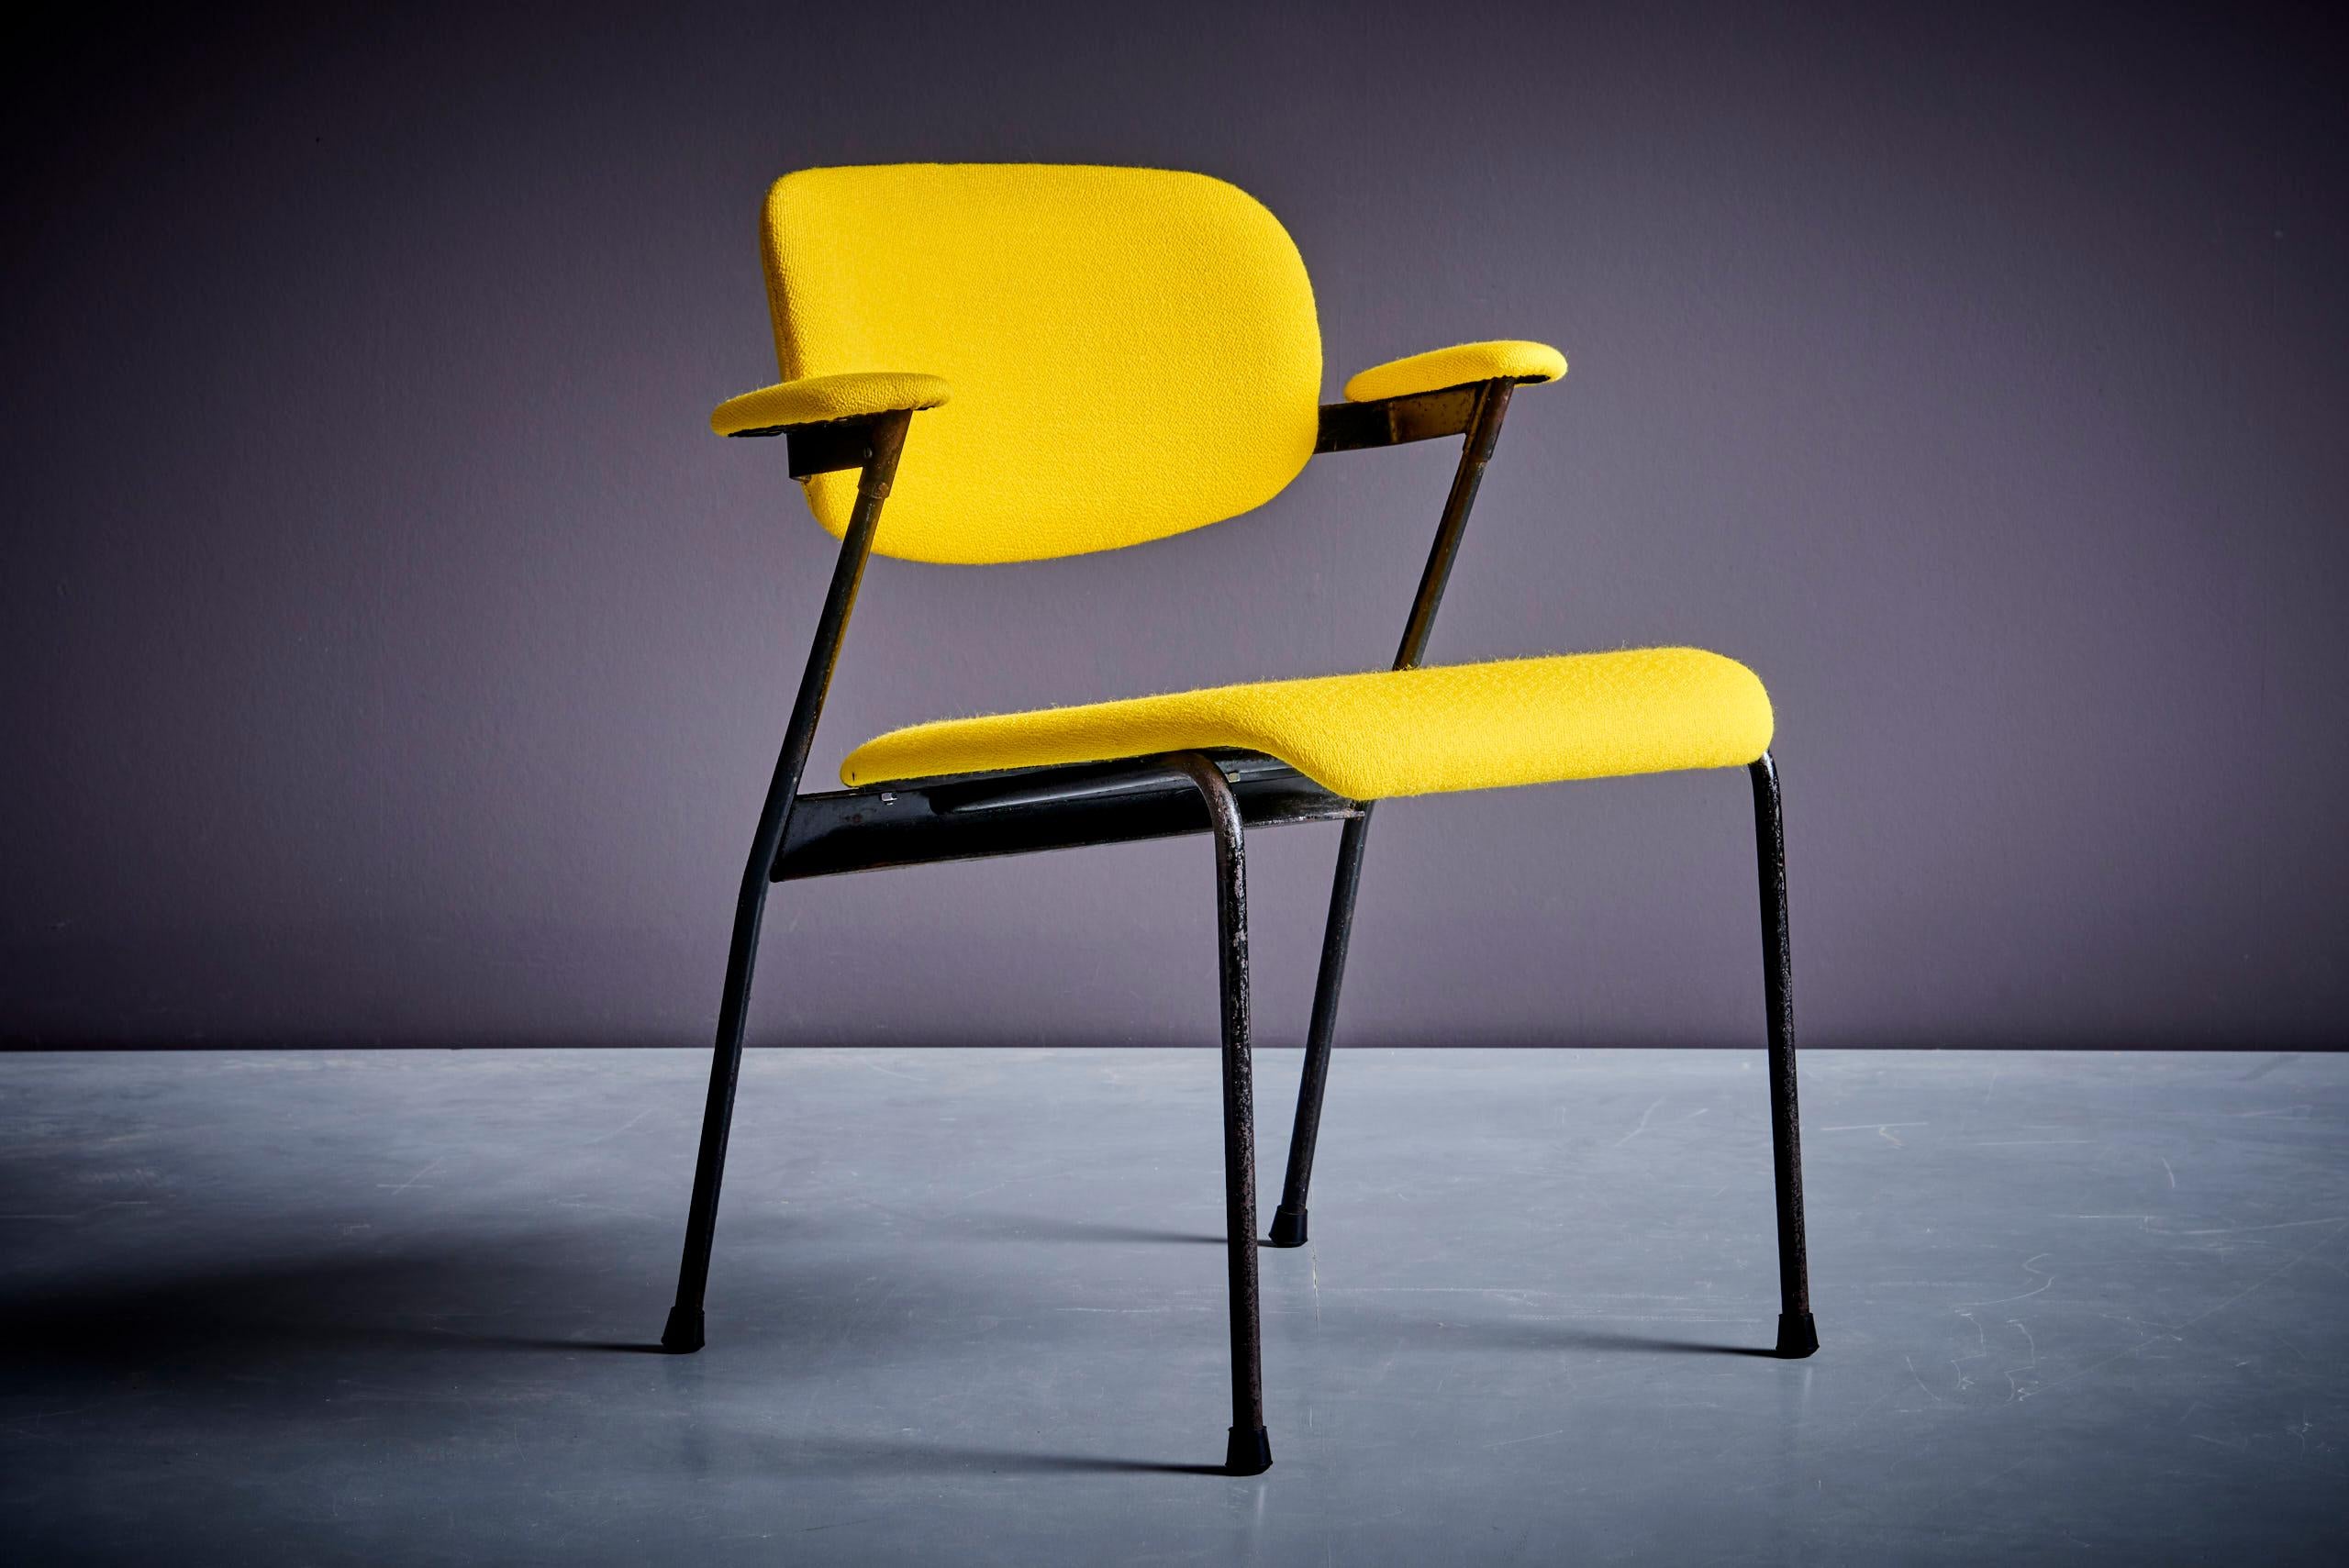 Mid-20th Century Willy van der Meeren for Tubax Pair of Lounge Chairs in yellow For Sale